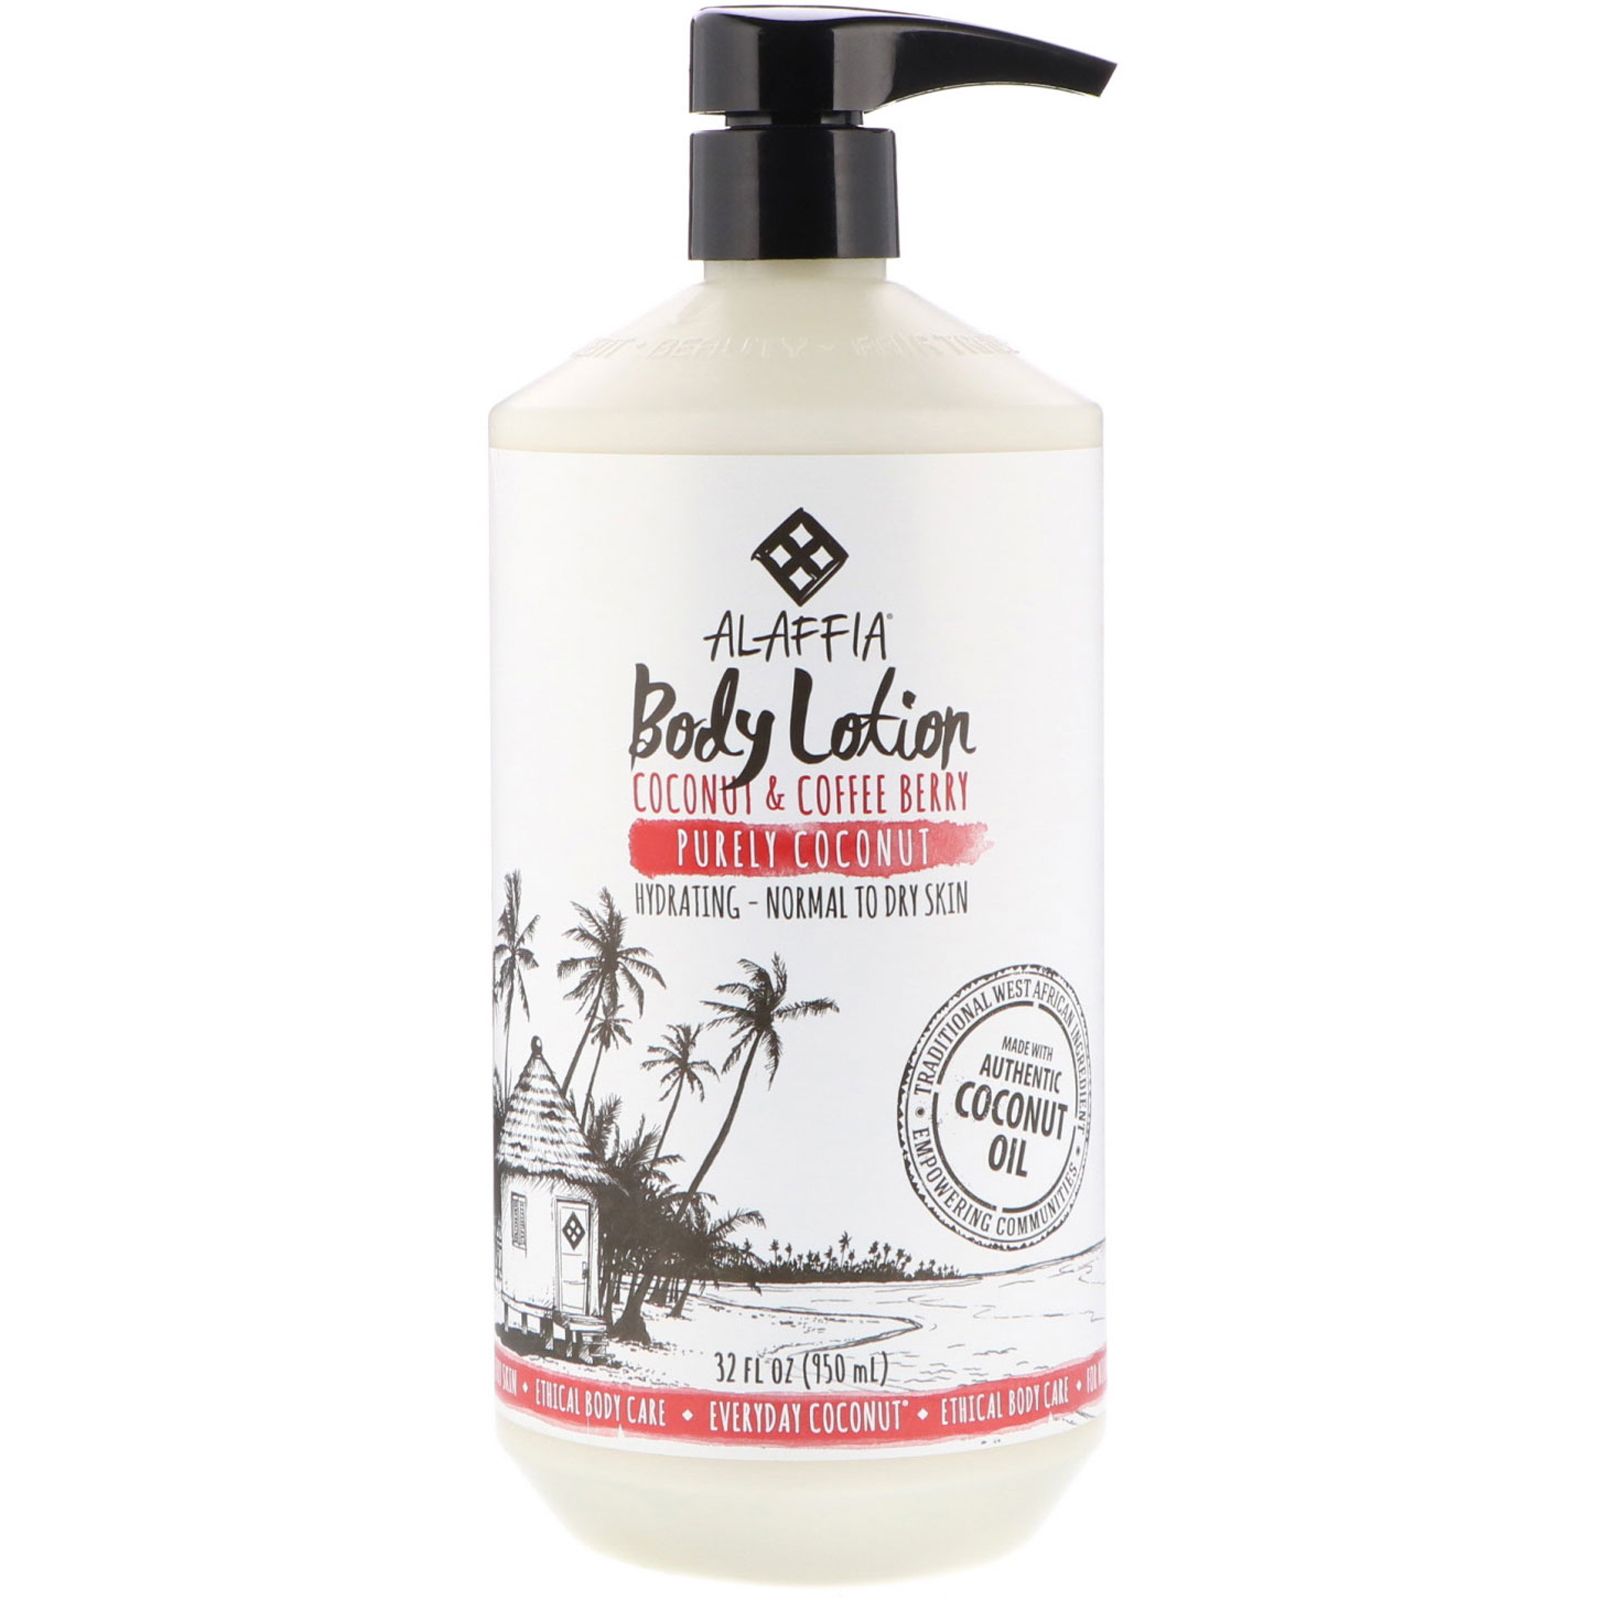 Everyday Coconut Body Lotion Hydrating Normal to Dry Skin Purely Coconut 32 fl oz (950 ml)